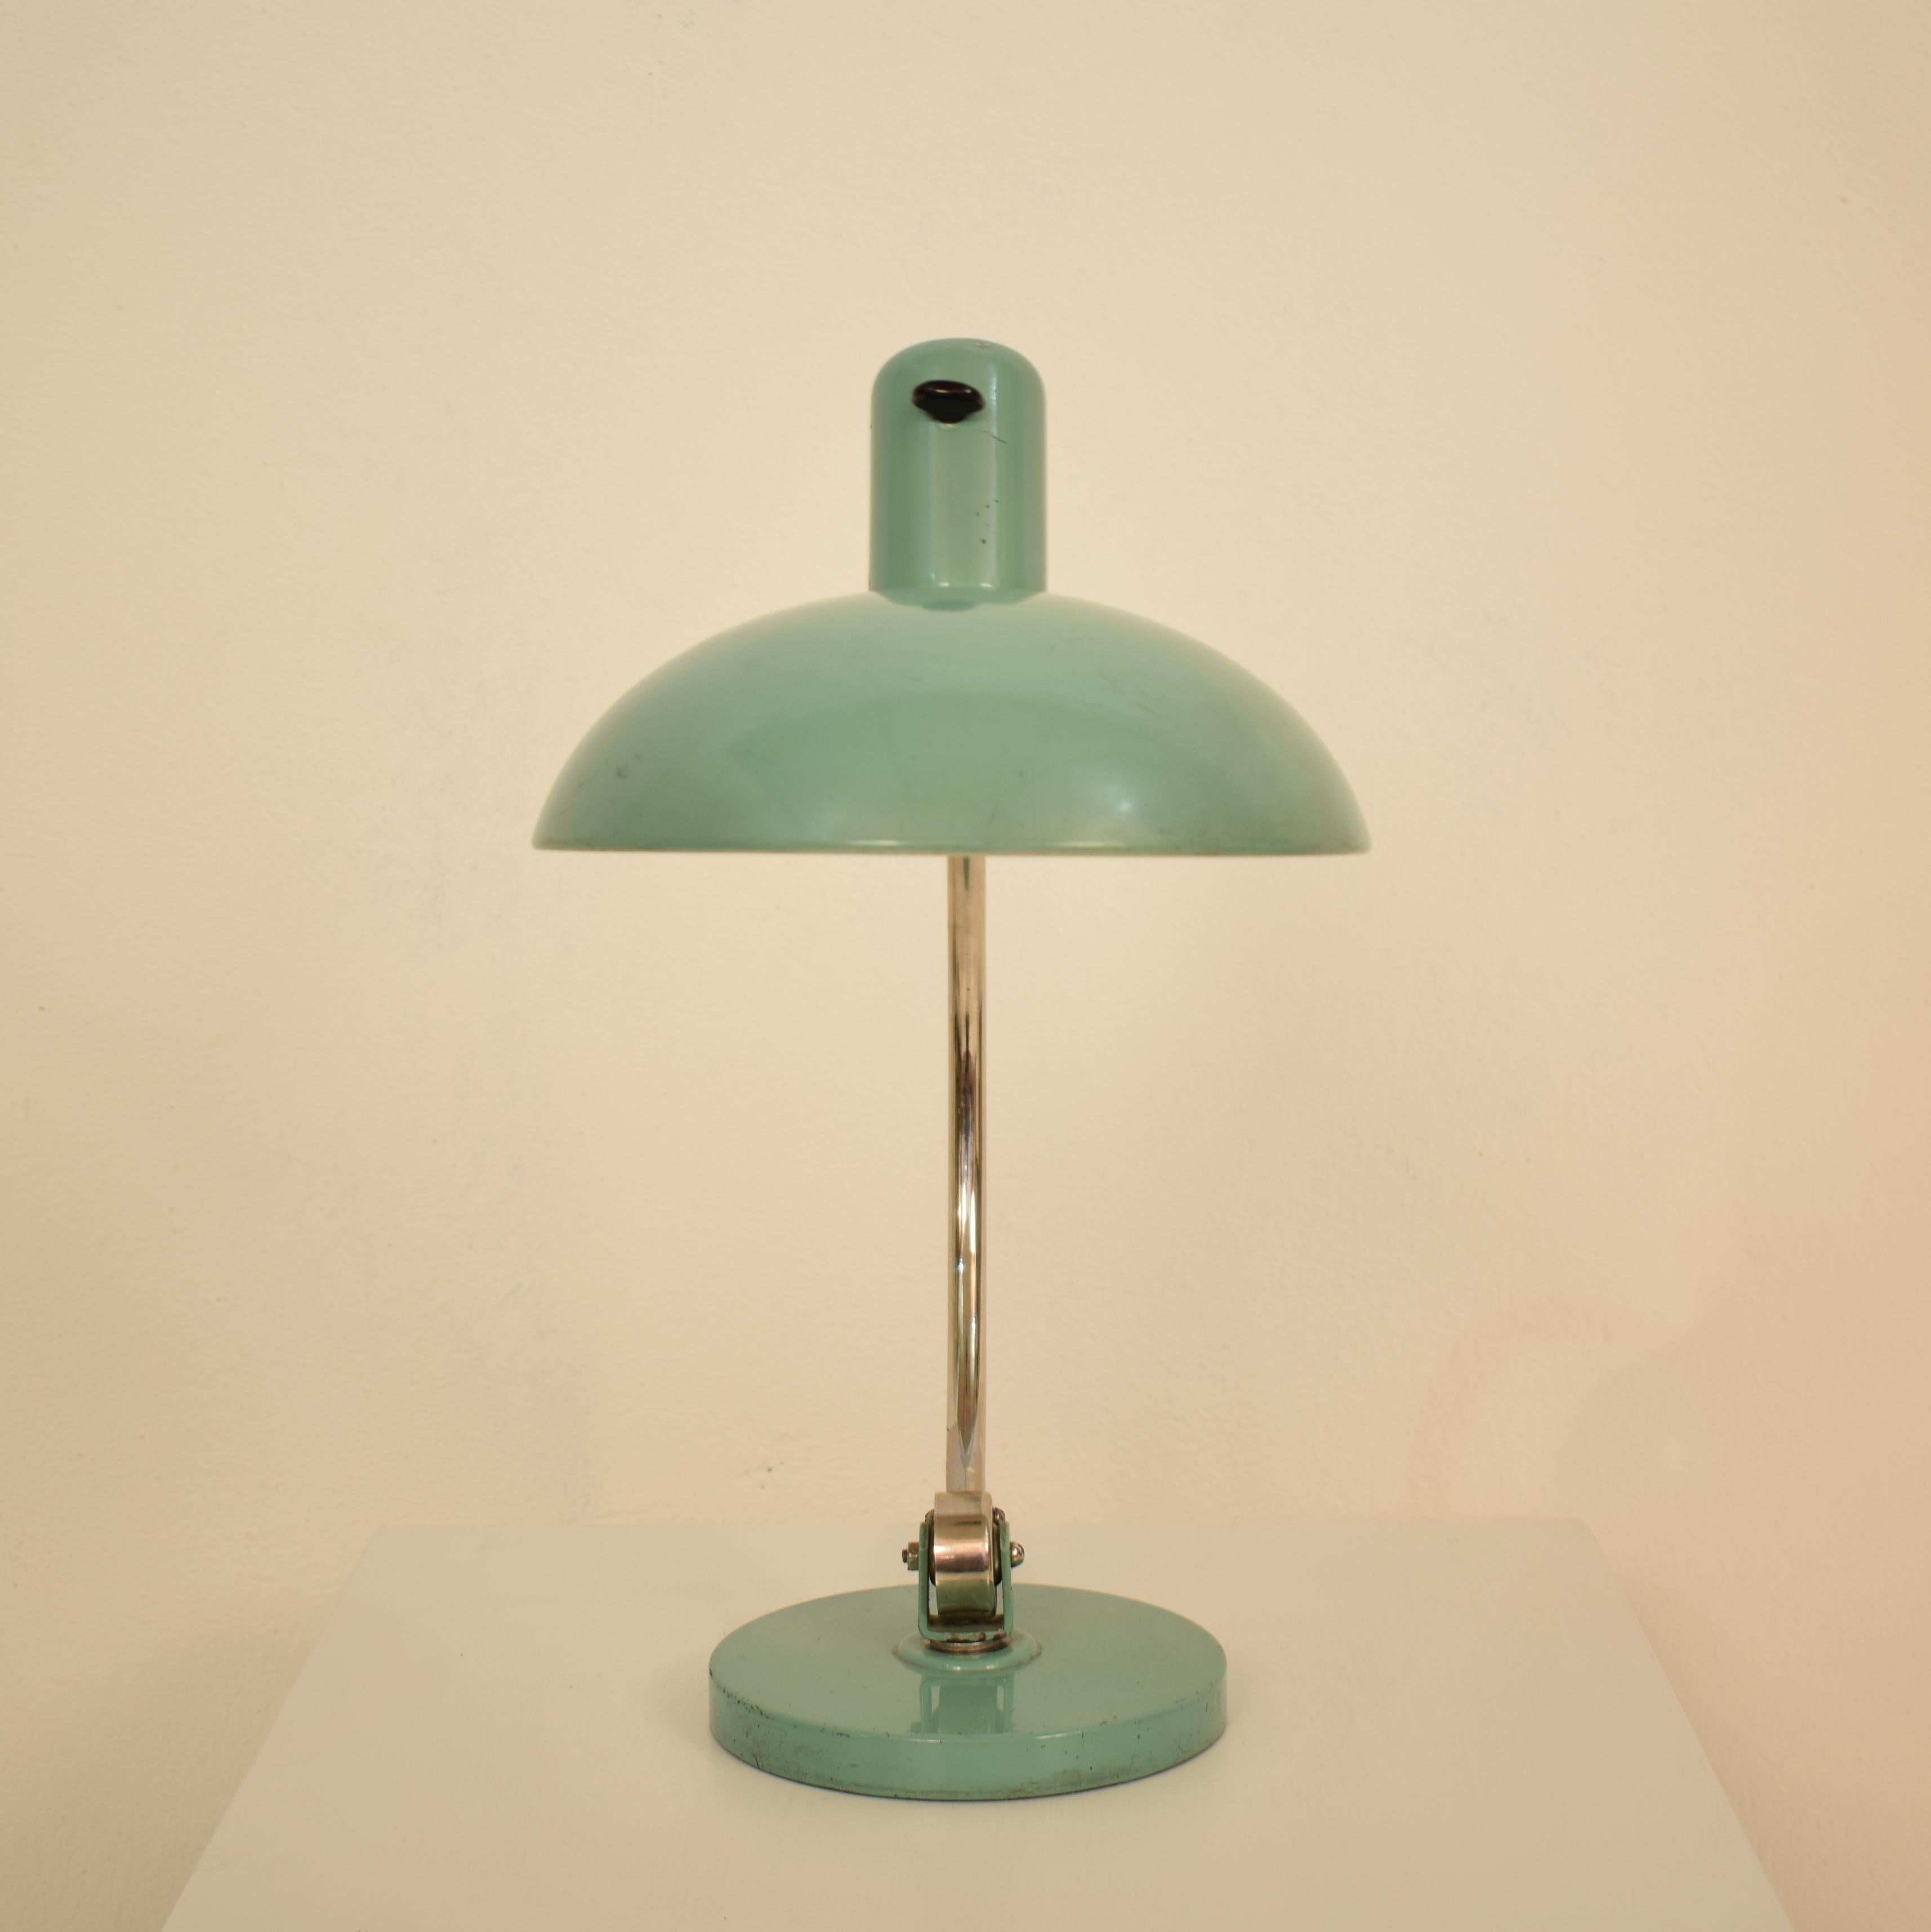 This midcentury table lamp was made by Kaiser Idell, circa 1960.
It has a great original mint green finishing and beautiful Patina.
A unique piece which is a great eyecatcher for your antique, modern, space age or midcentury interior.
All pieces